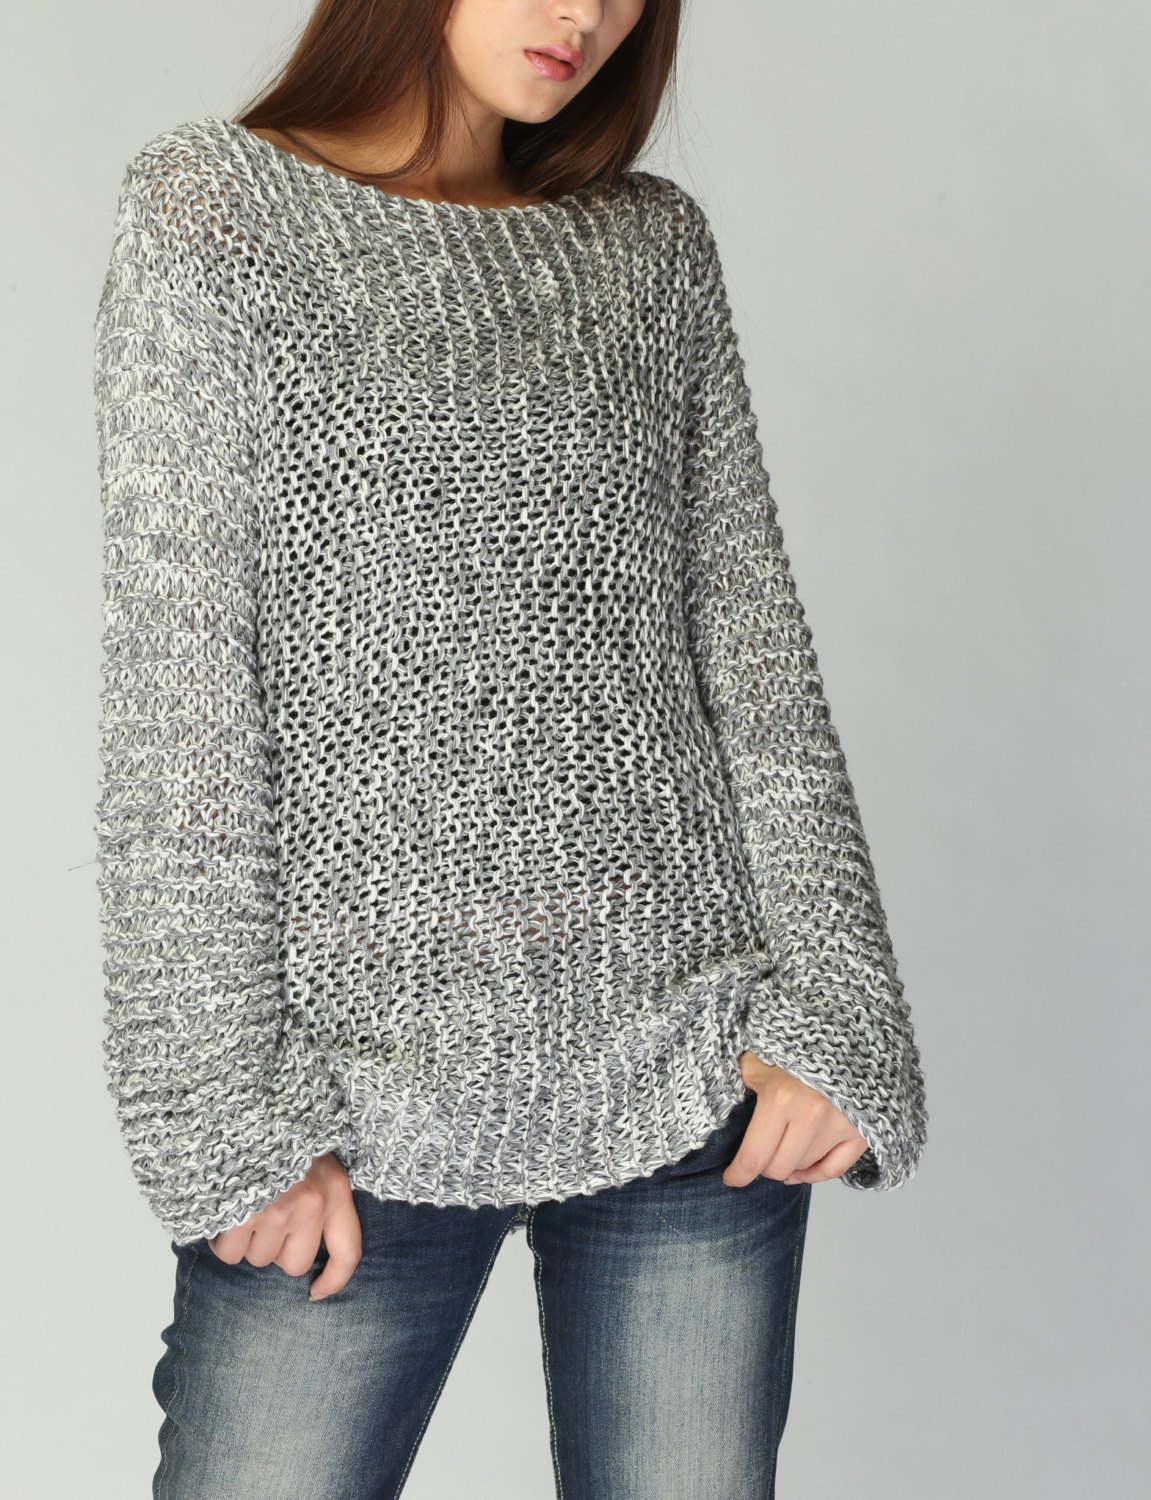 Hand Knit Woman Sweater Eco Cotton Long Sweater Light Grey - Etsy Canada